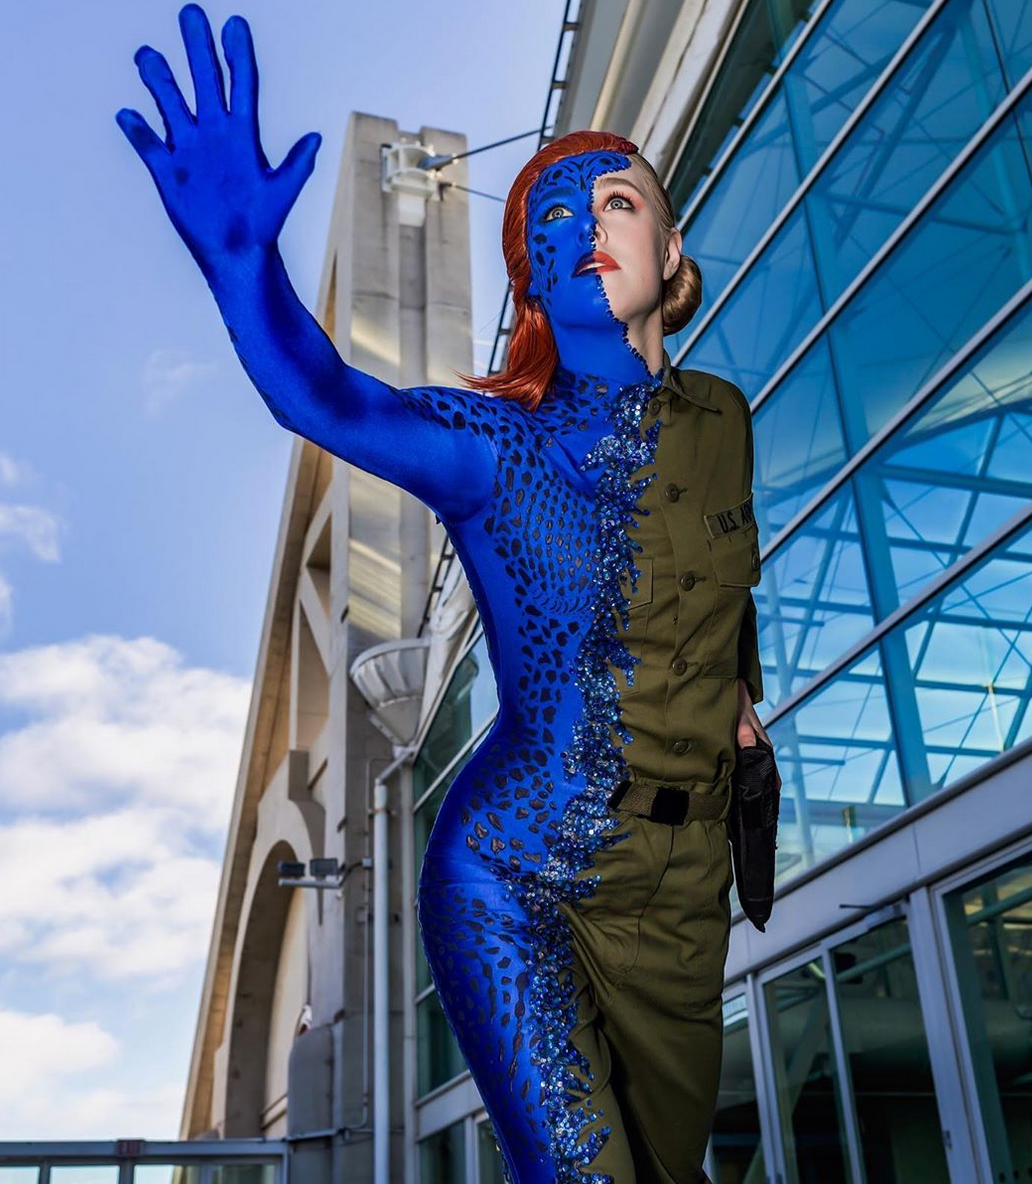 Awesome Mystique Cosplay | Project-Nerd